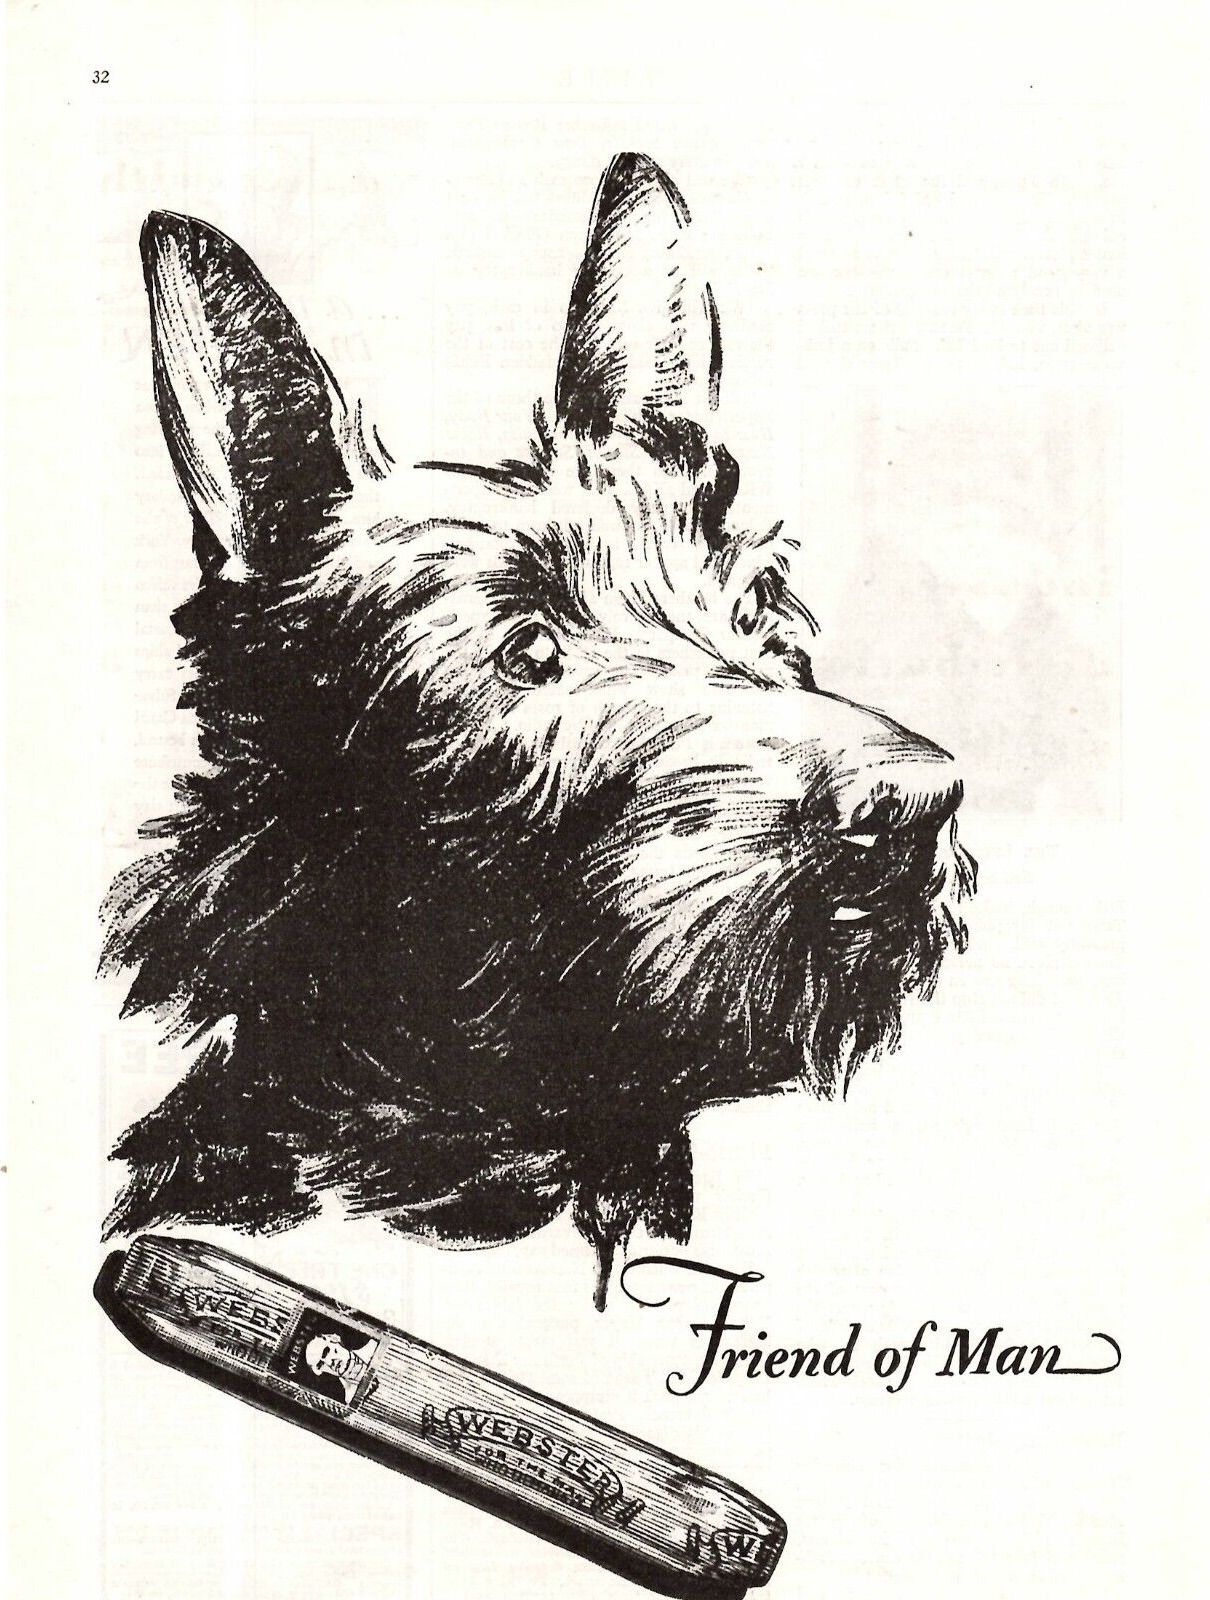 1929 Print Ad  Campbell -Ewald Client Webster Cigars Friend of Man Scottie Dog